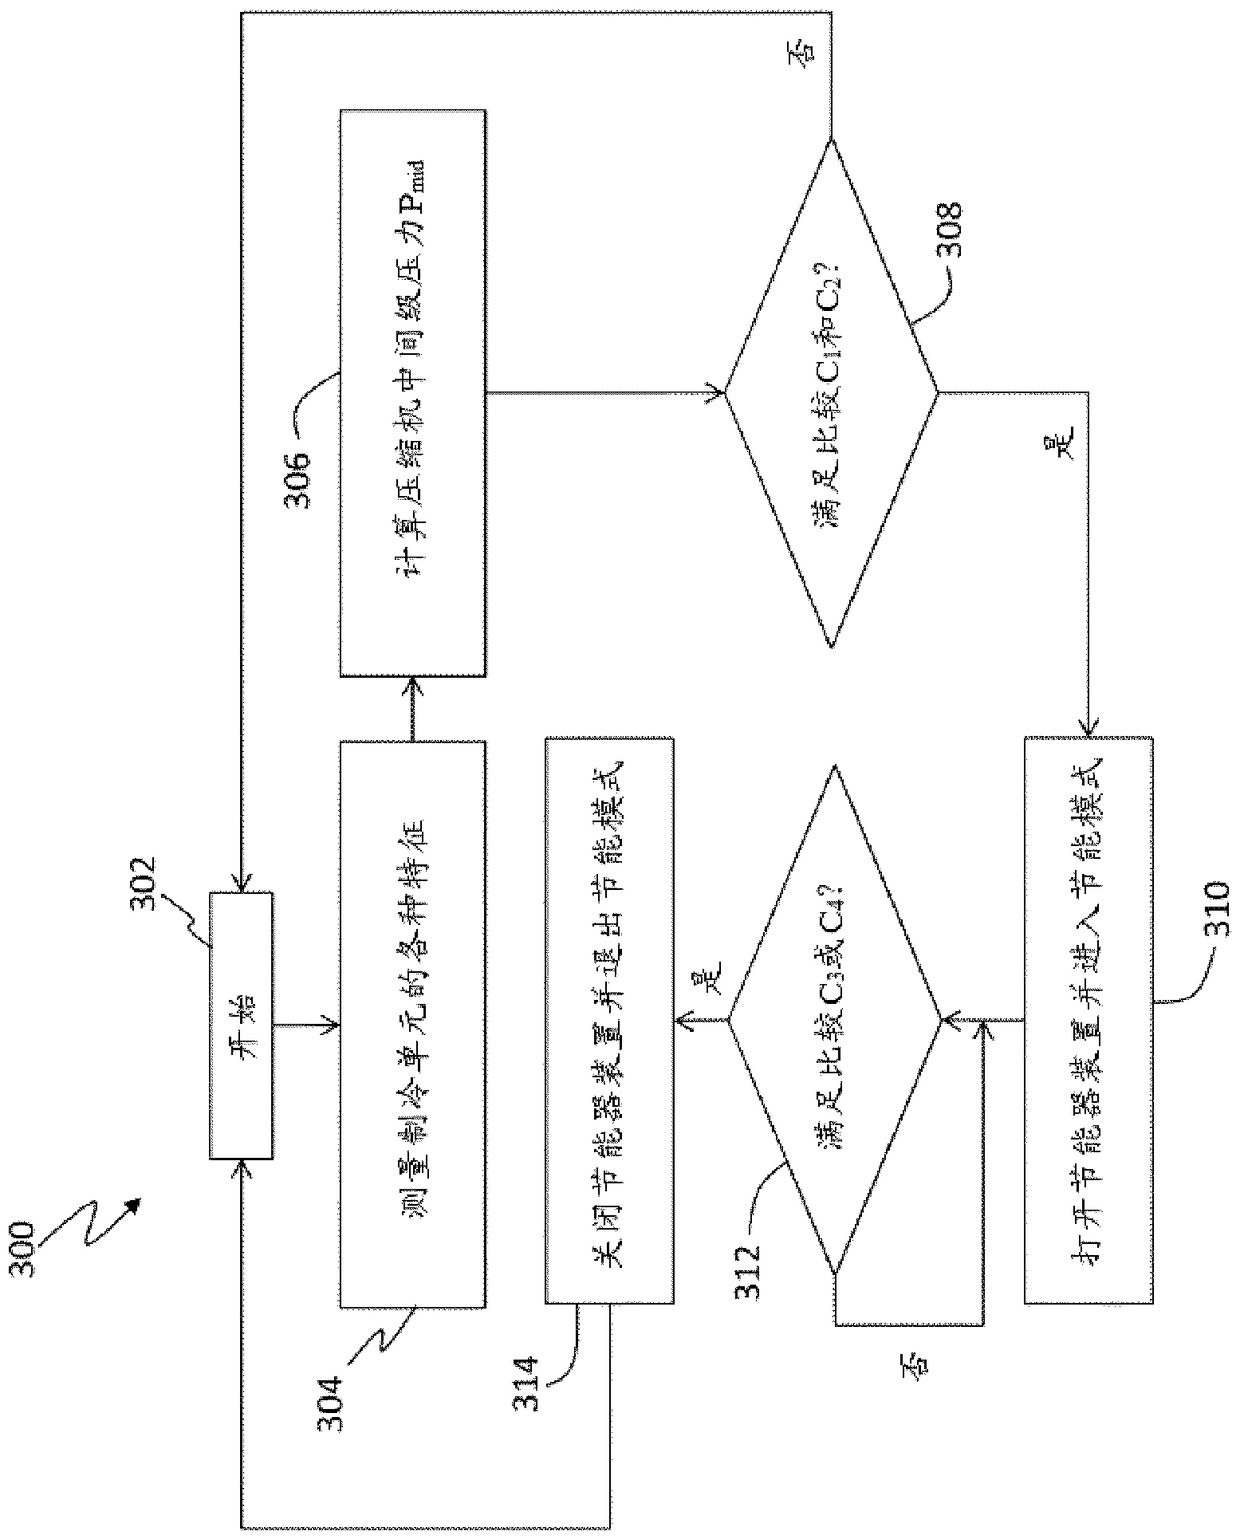 Economized device control for refrigeration system